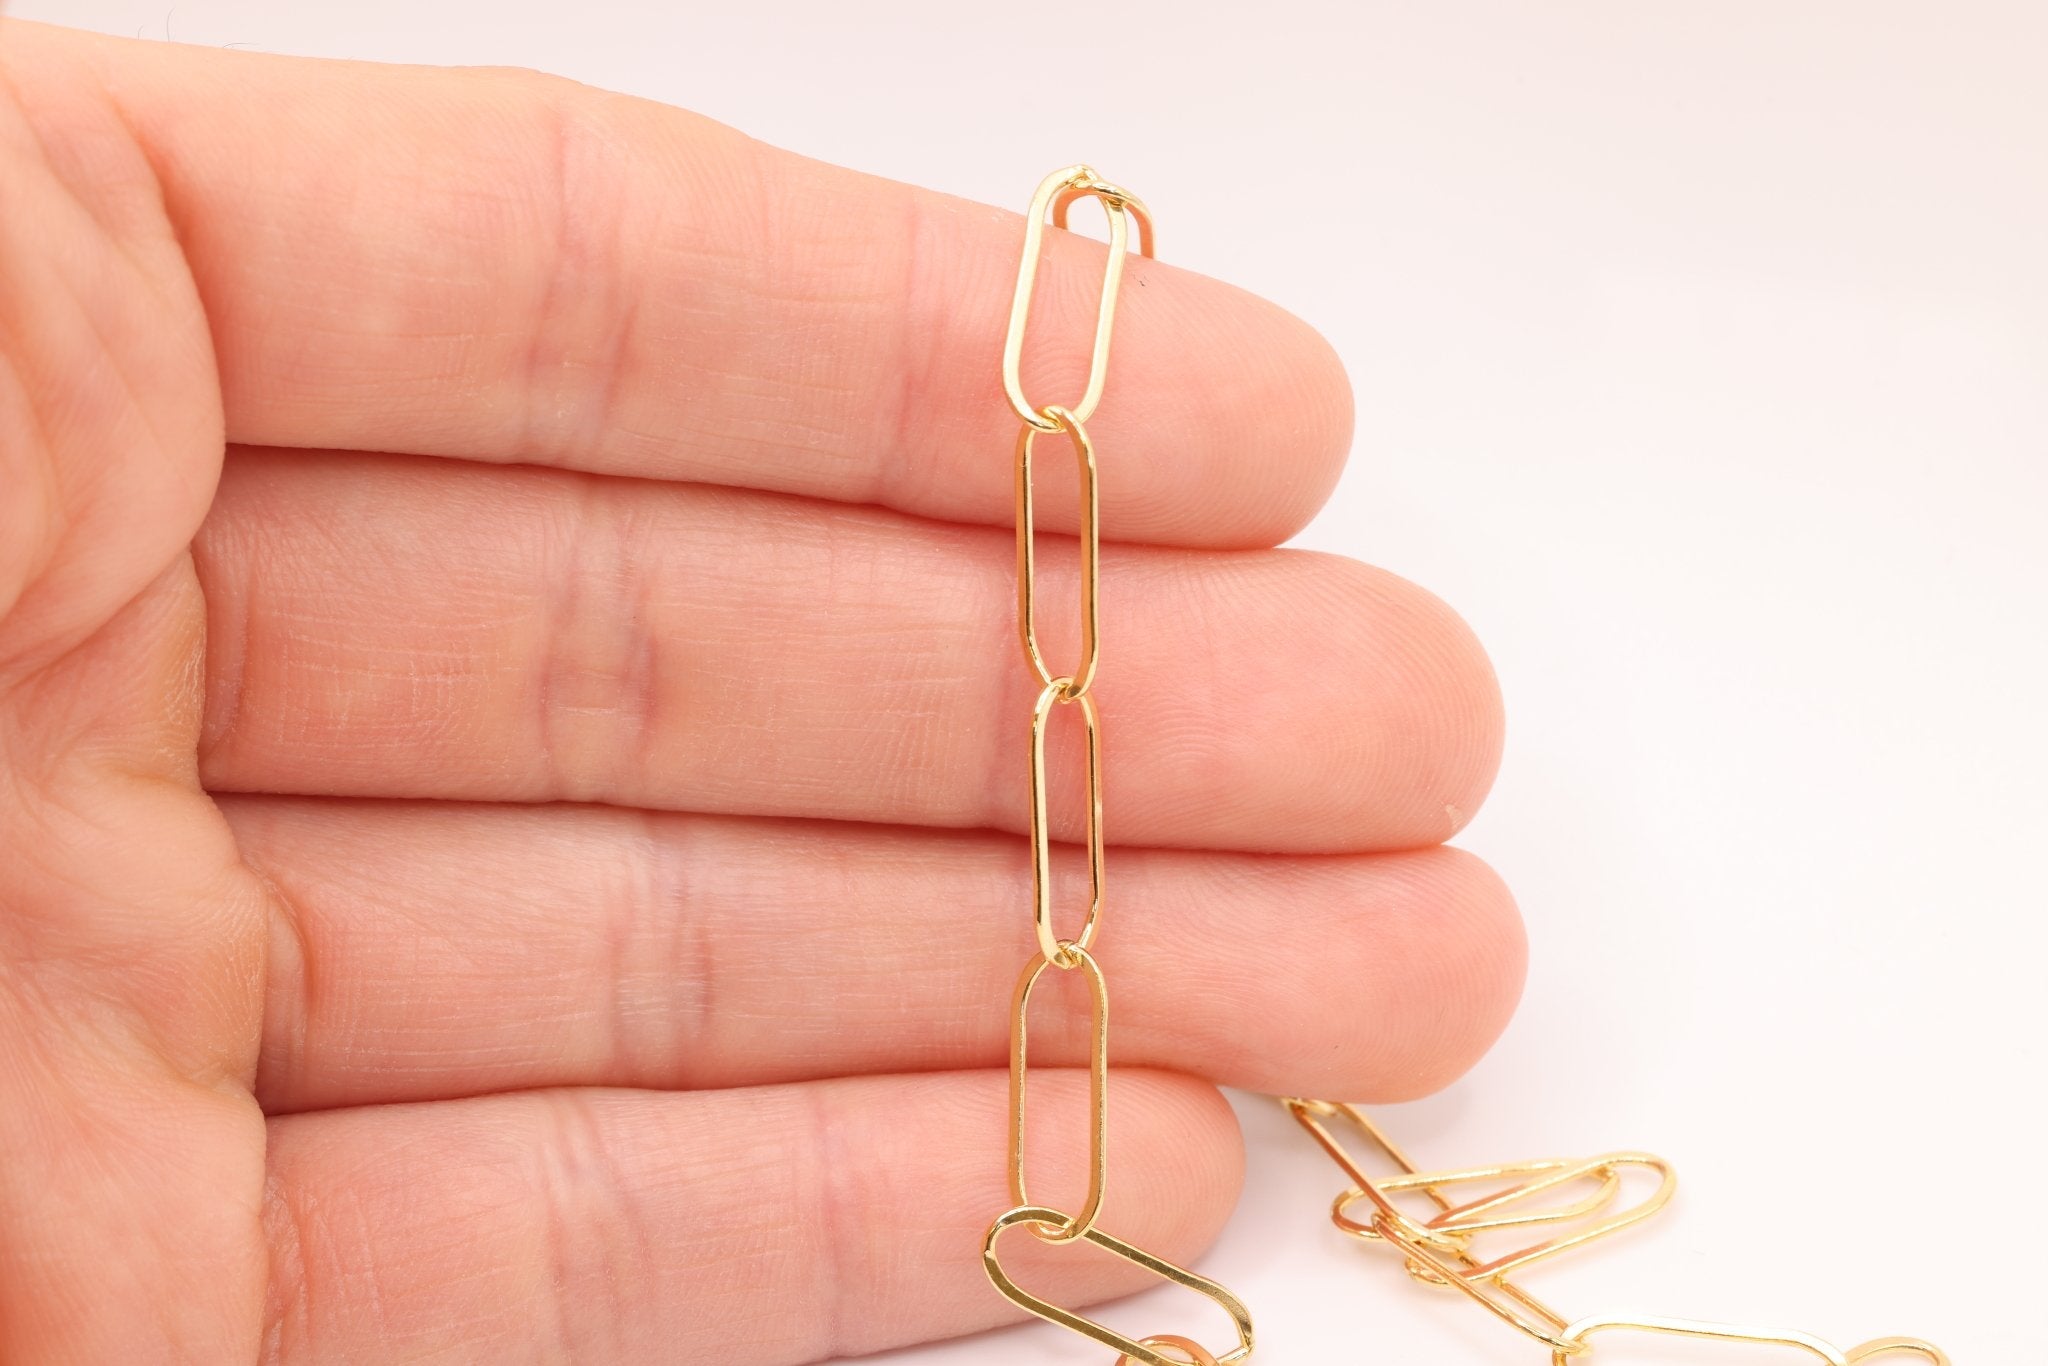 6mm x 15mm Drawn Flat Cable Chain, 14K Gold-Filled, Spool or Footage Rectangle Chain Link Paperclip Chain - HarperCrown